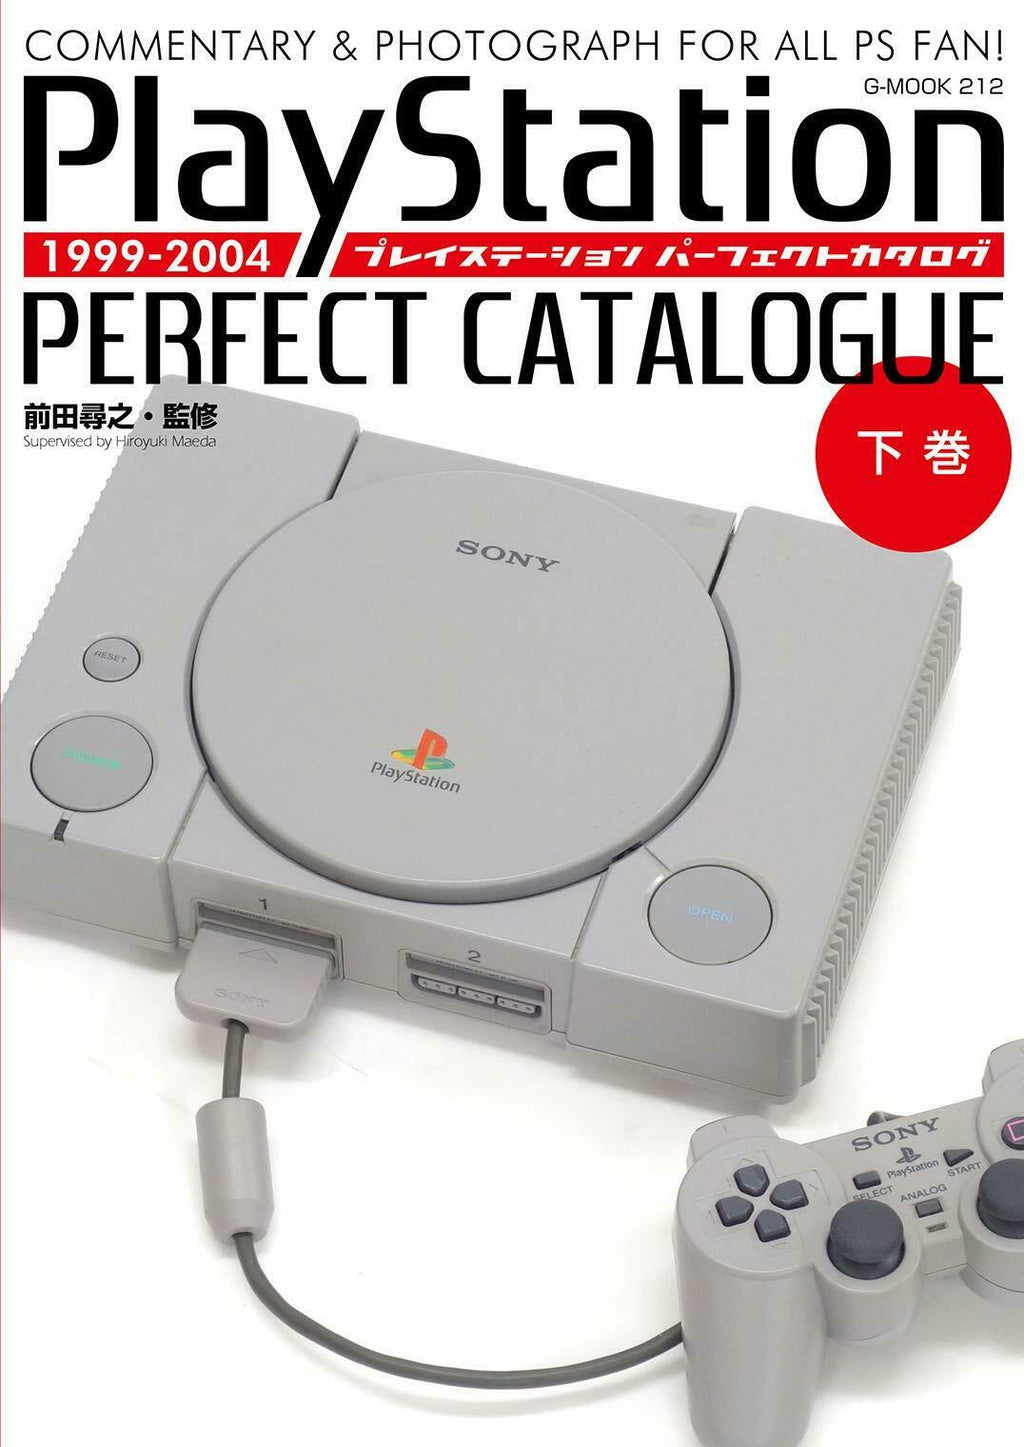 NEW PlayStation Perfect Catalogue Vol.2 1999-2004 | JAPAN Game Guide Book